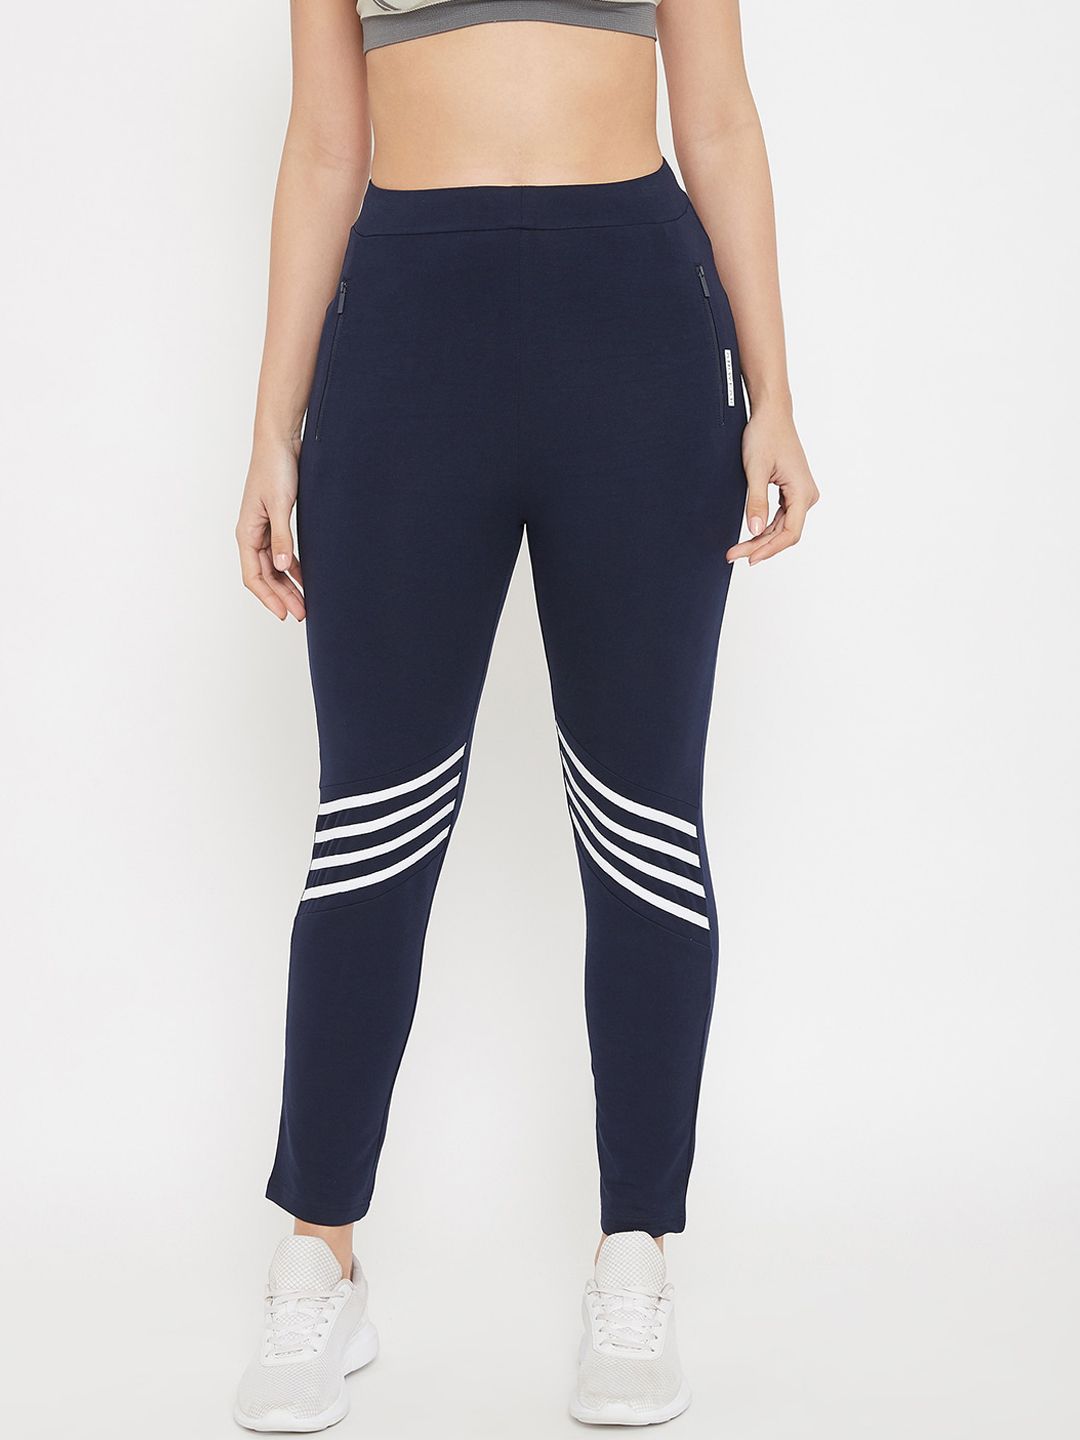 C9 AIRWEAR Women Navy Blue Solid Track Pants Price in India